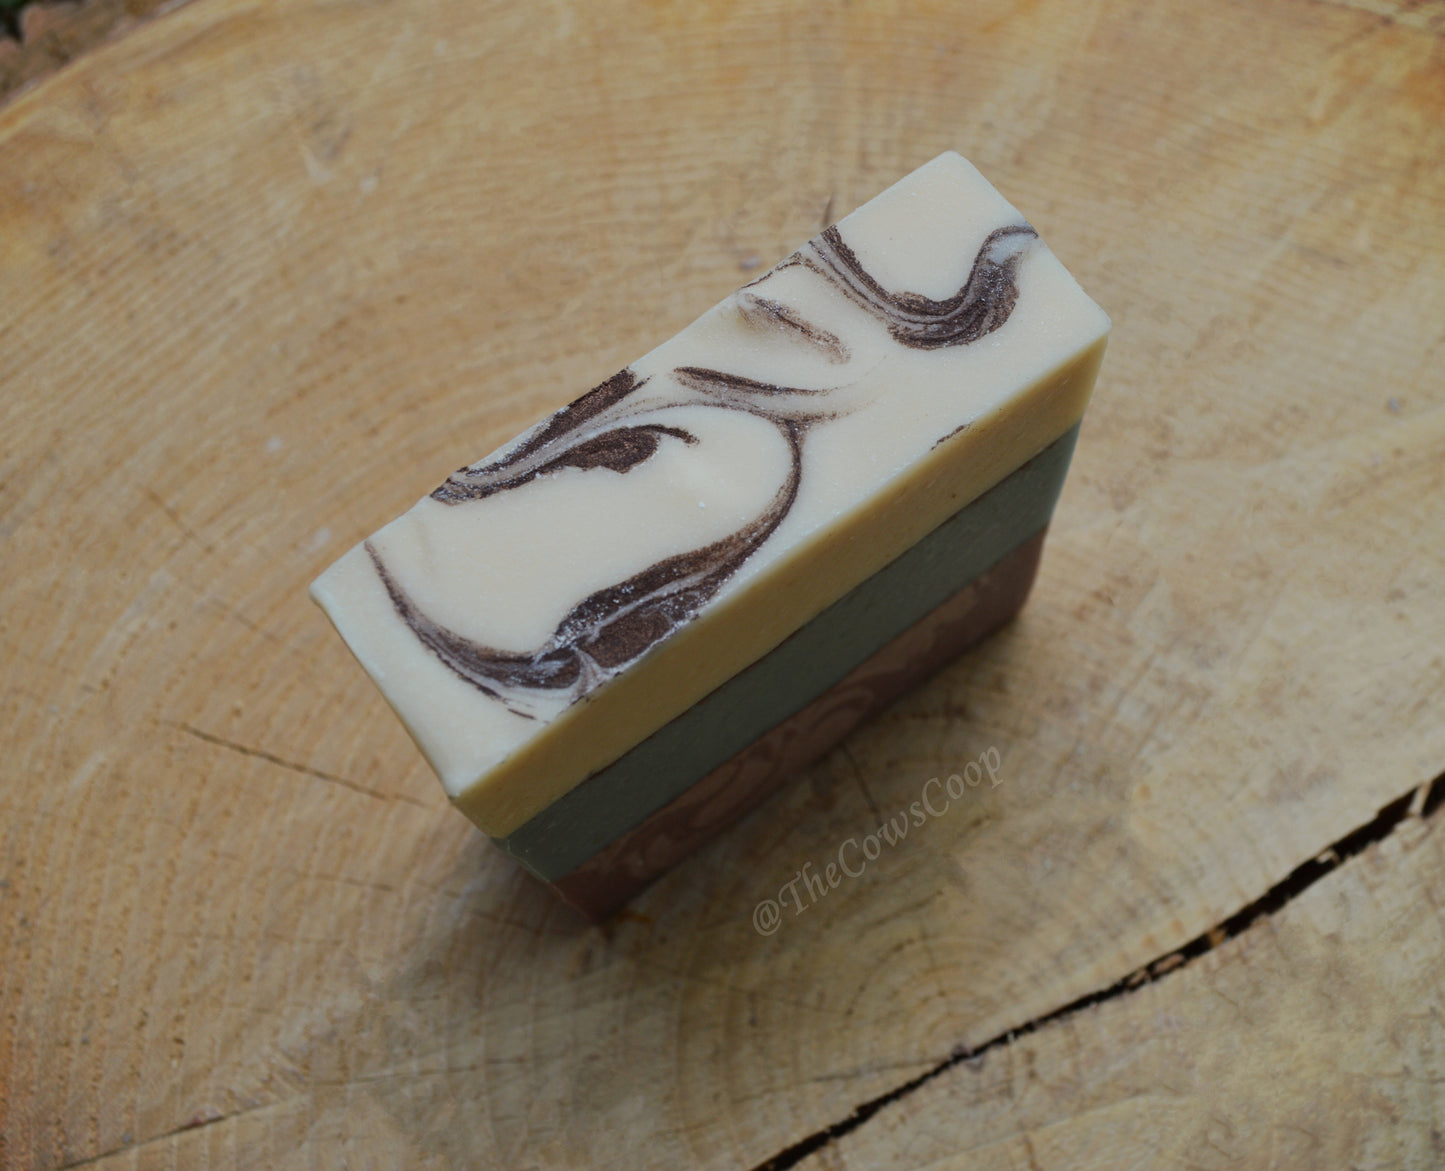 The Working Man *BEST SELLER!* (Japanese Grapefruit and Aquatic Breeze)- Cow Milk Soap